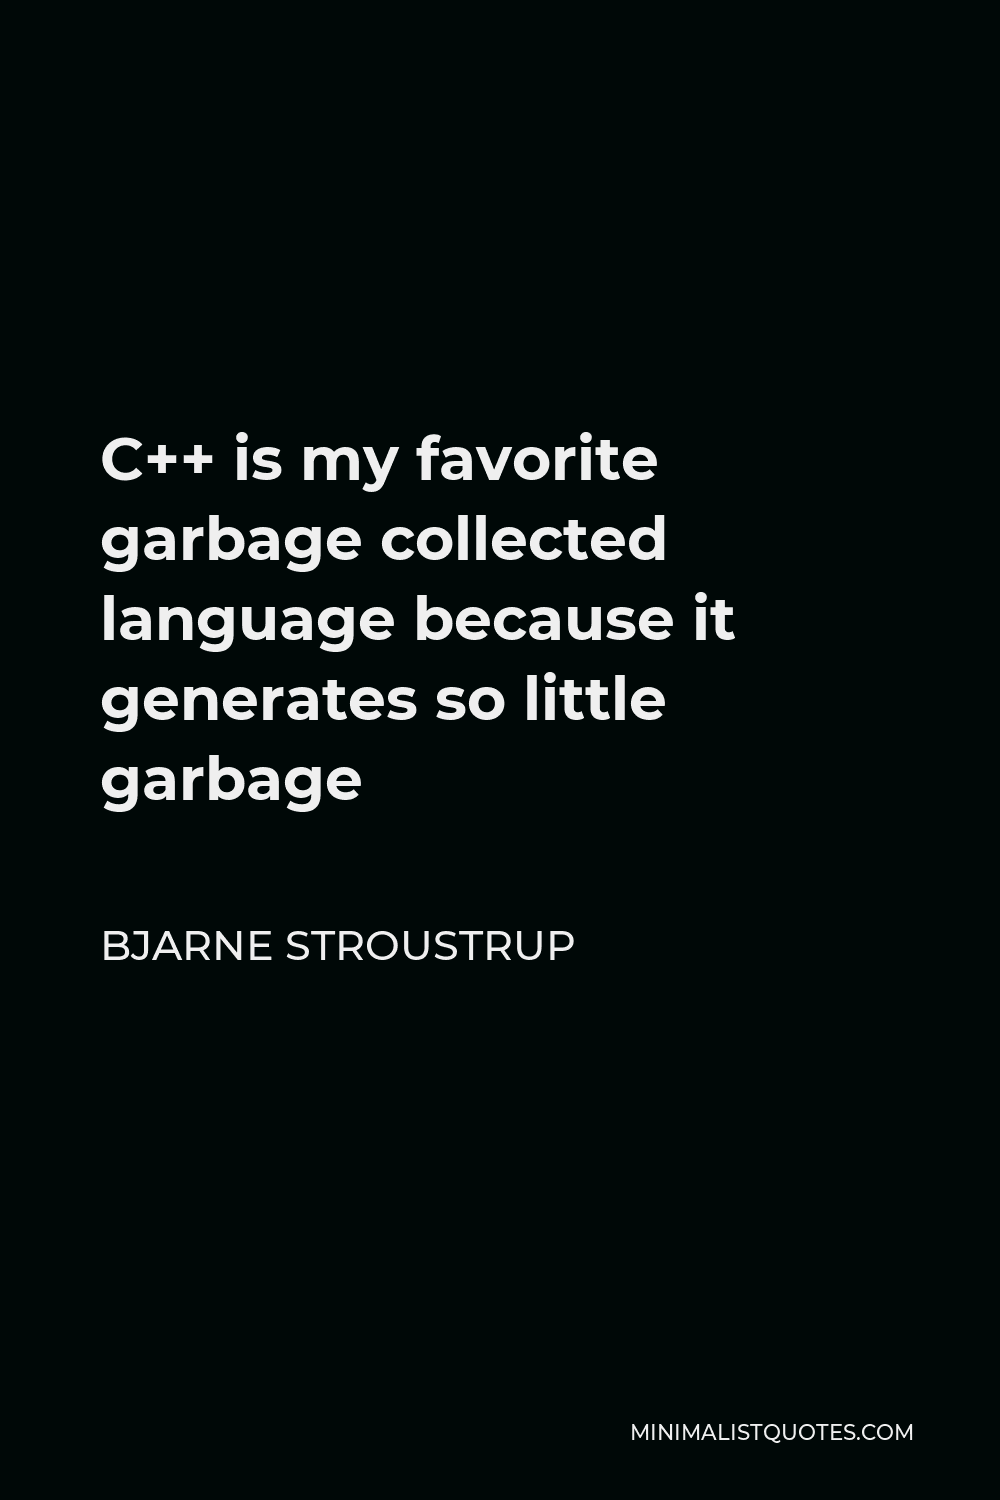 Bjarne Stroustrup Quote - C++ is my favorite garbage collected language because it generates so little garbage